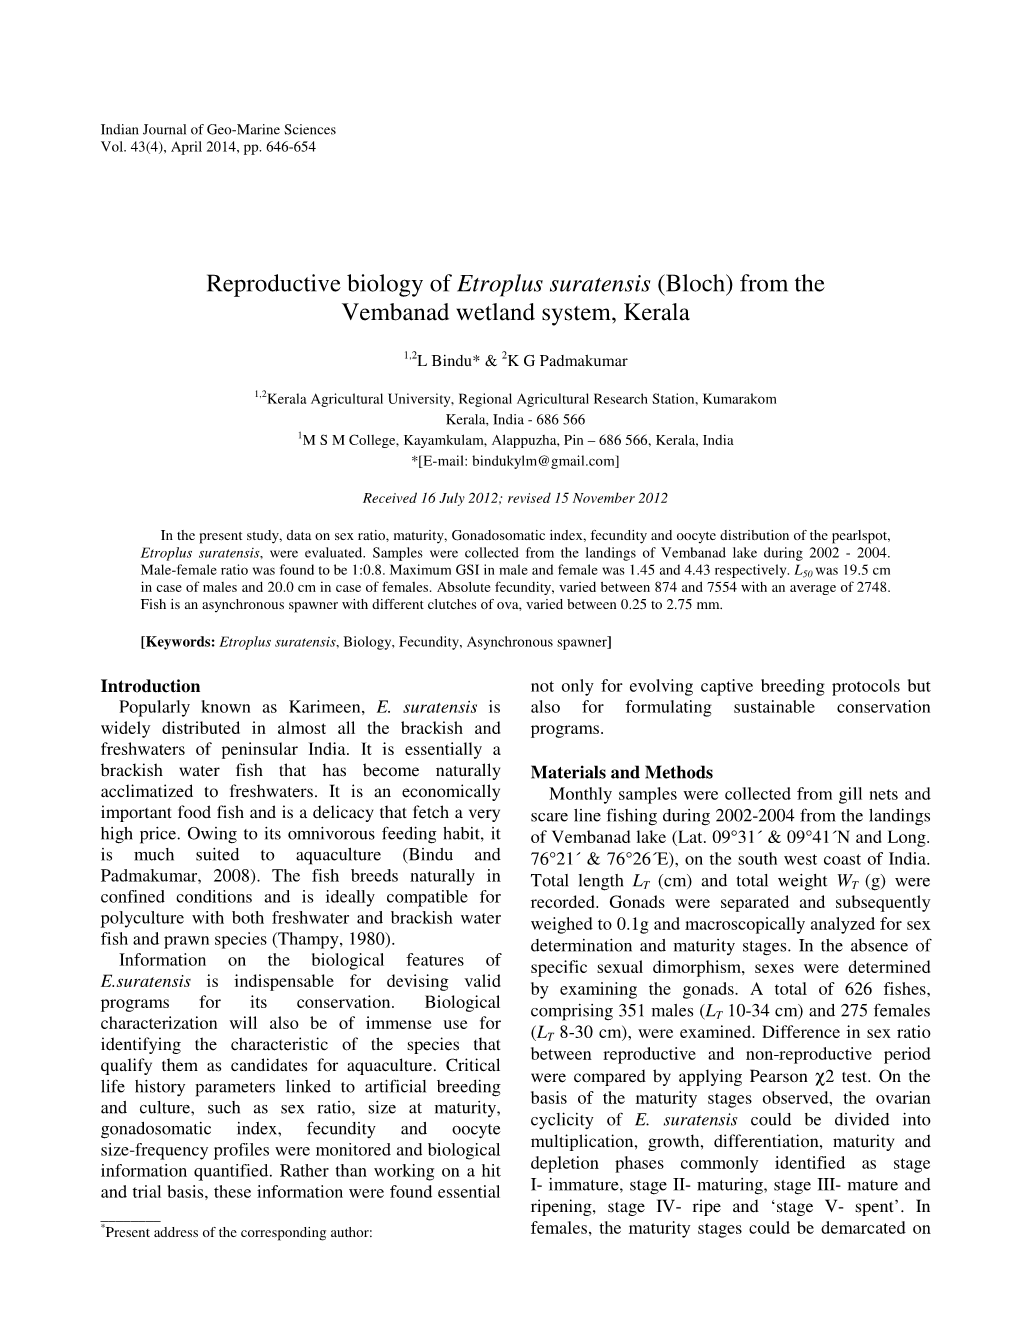 Reproductive Biology of Etroplus Suratensis (Bloch) from the Vembanad Wetland System, Kerala